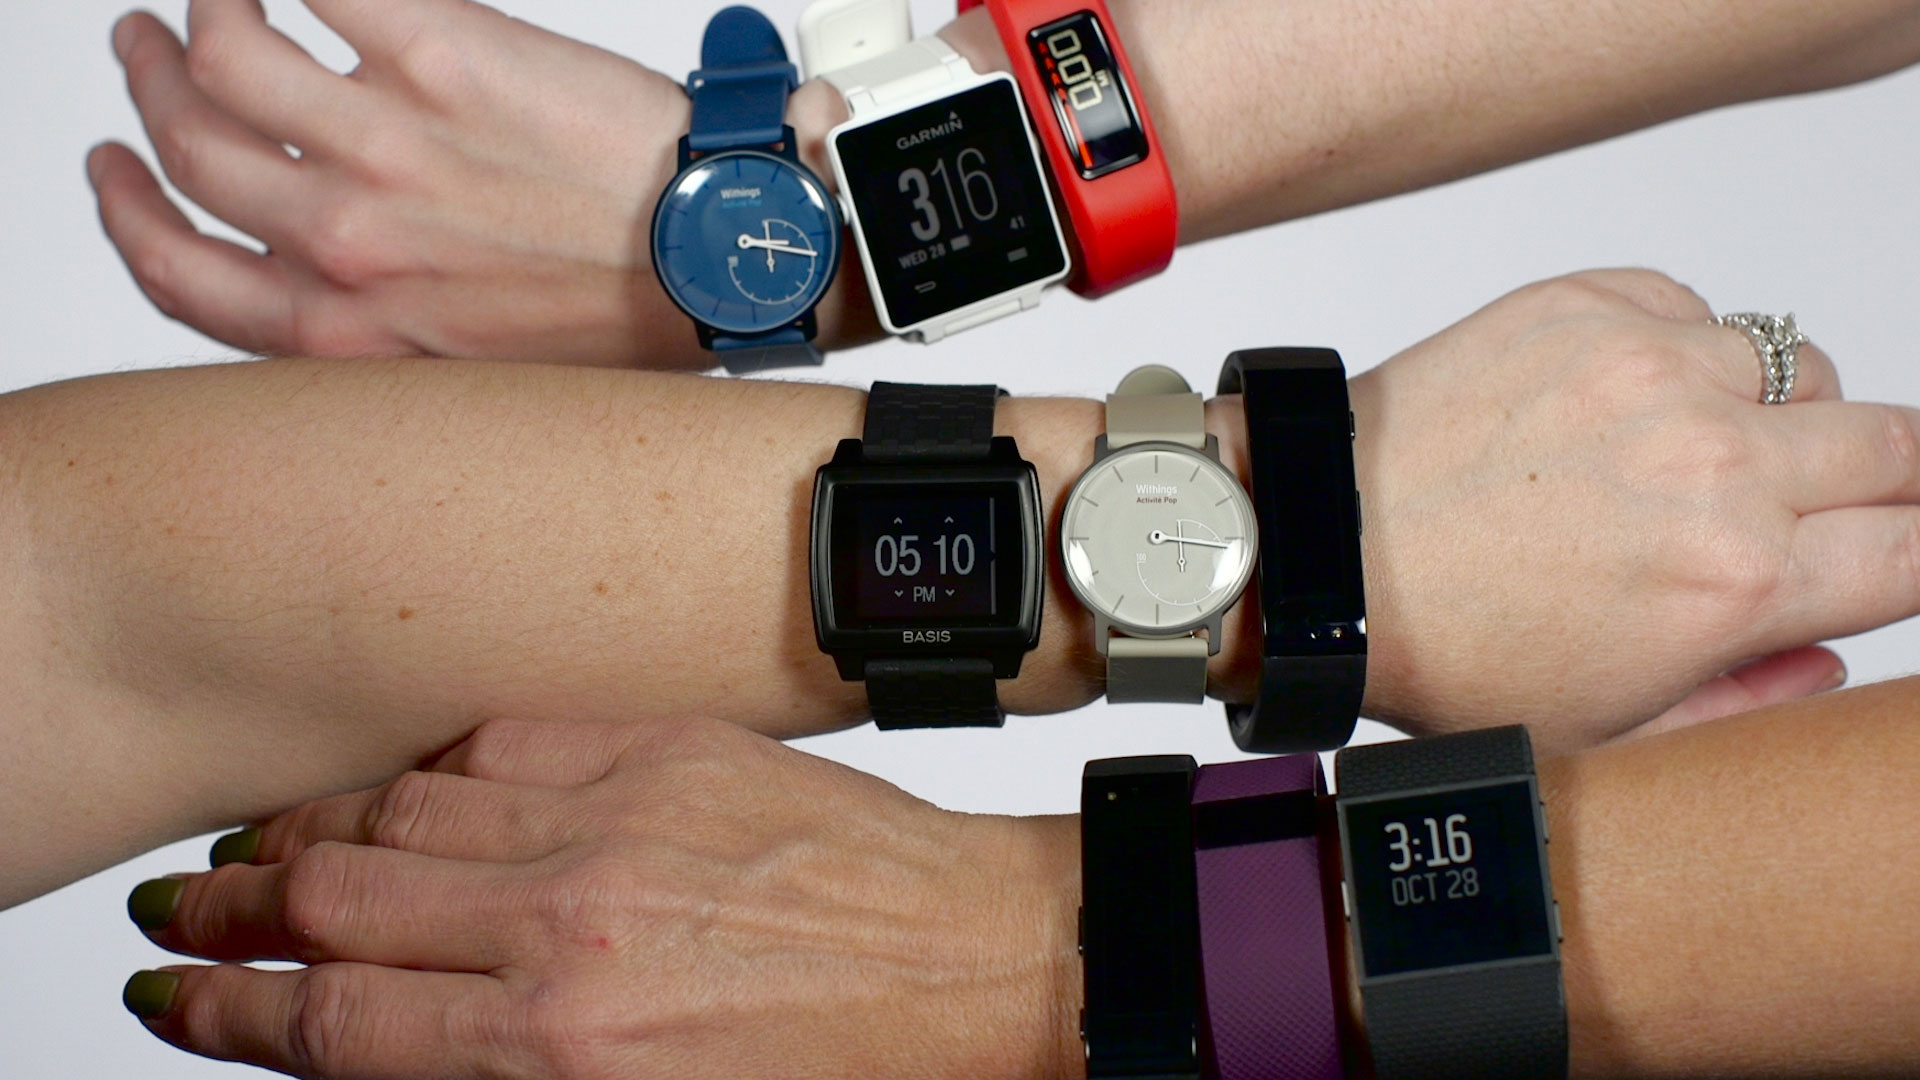 Knorretje jurk Bezighouden What Is The Best Fitness Tracker You Should Buy?